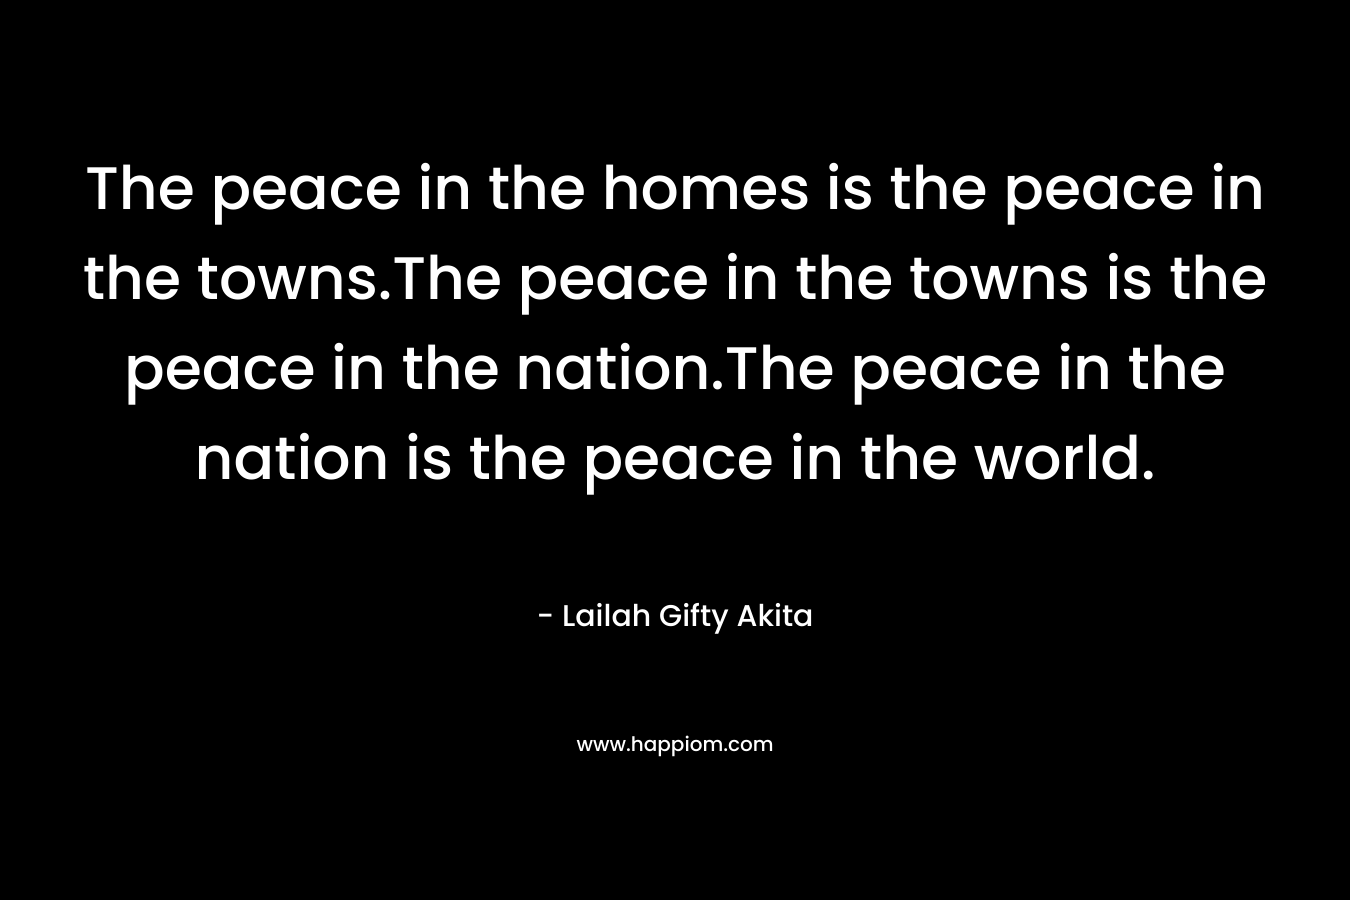 The peace in the homes is the peace in the towns.The peace in the towns is the peace in the nation.The peace in the nation is the peace in the world.